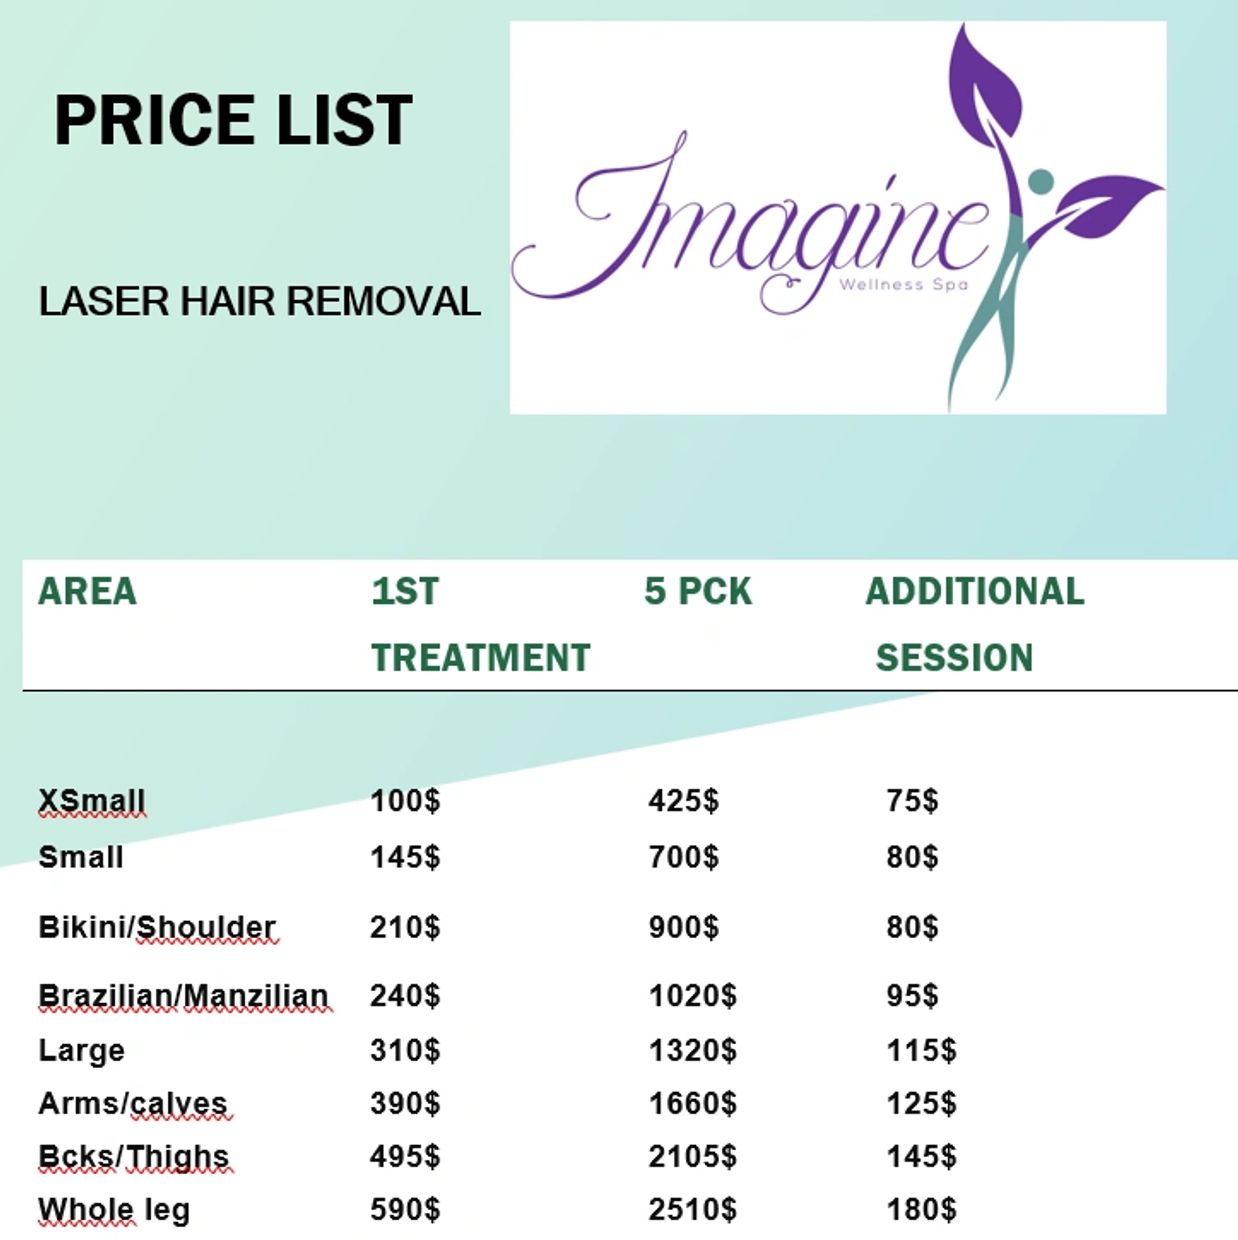 Laser Hair Removal, Hair Removal Treatment, Painless Laser Hair Removal -  Imagine Wellness Spa Massage Cape Coral, FL - Punta Gorda, Florida